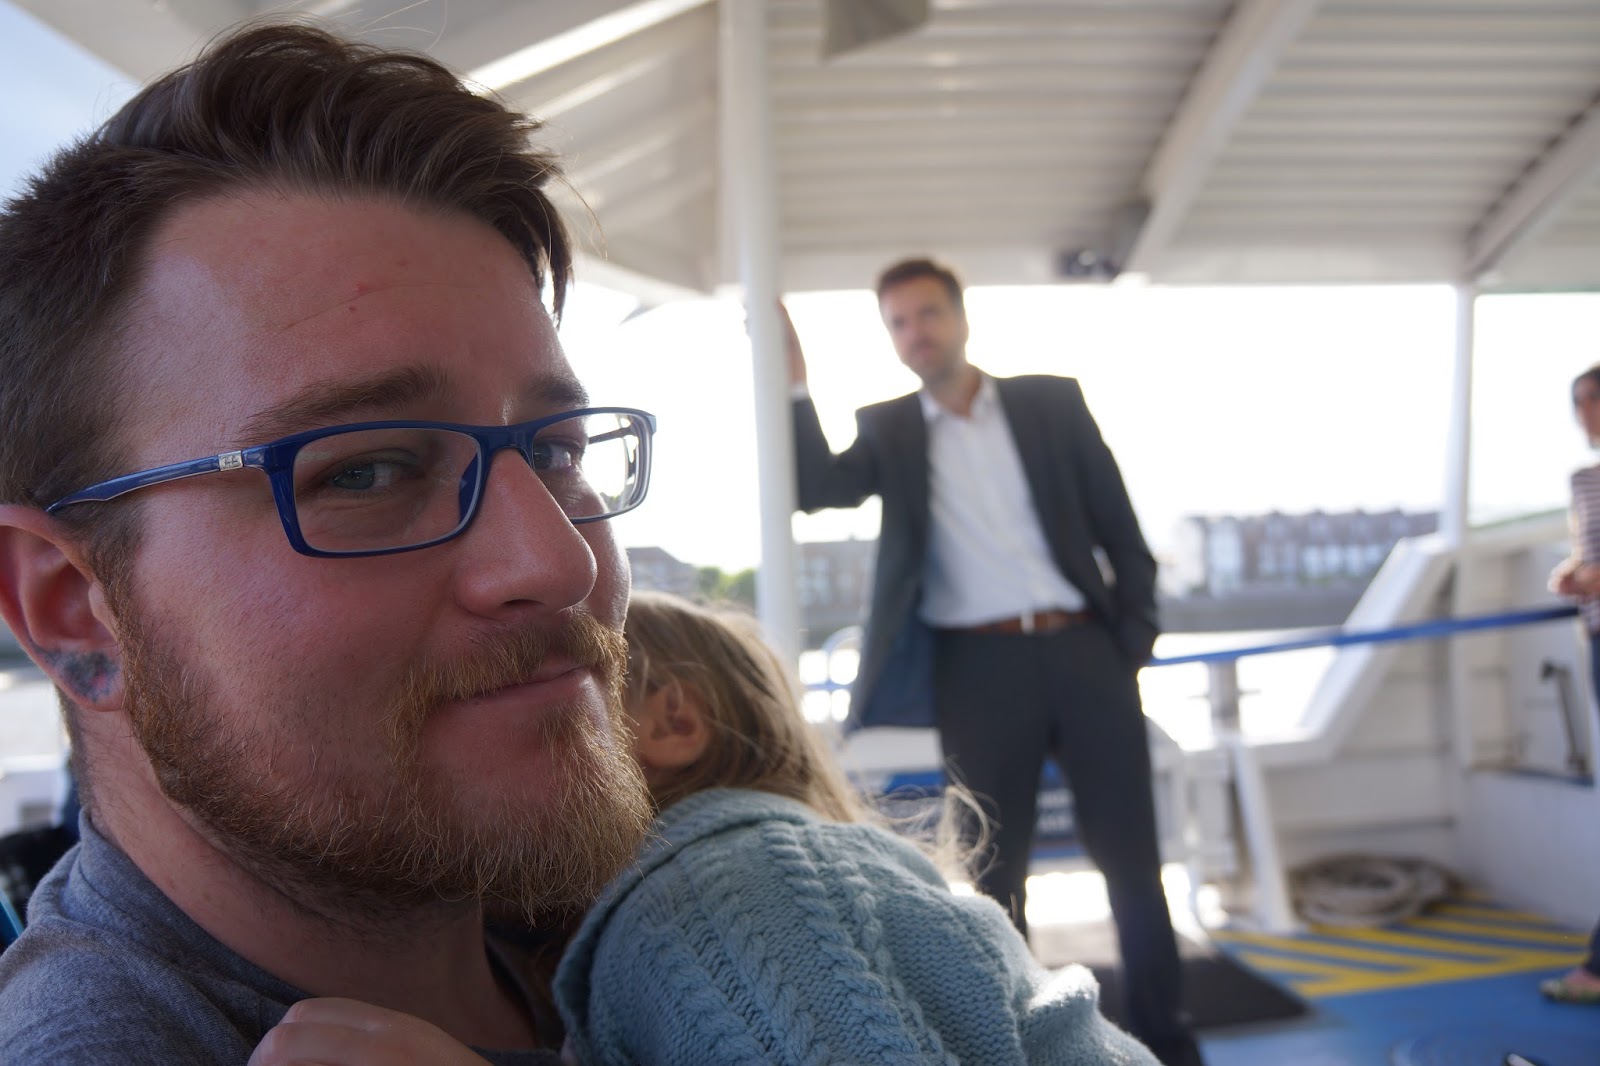 father and daughter riding on the mbna thames clipper boat service